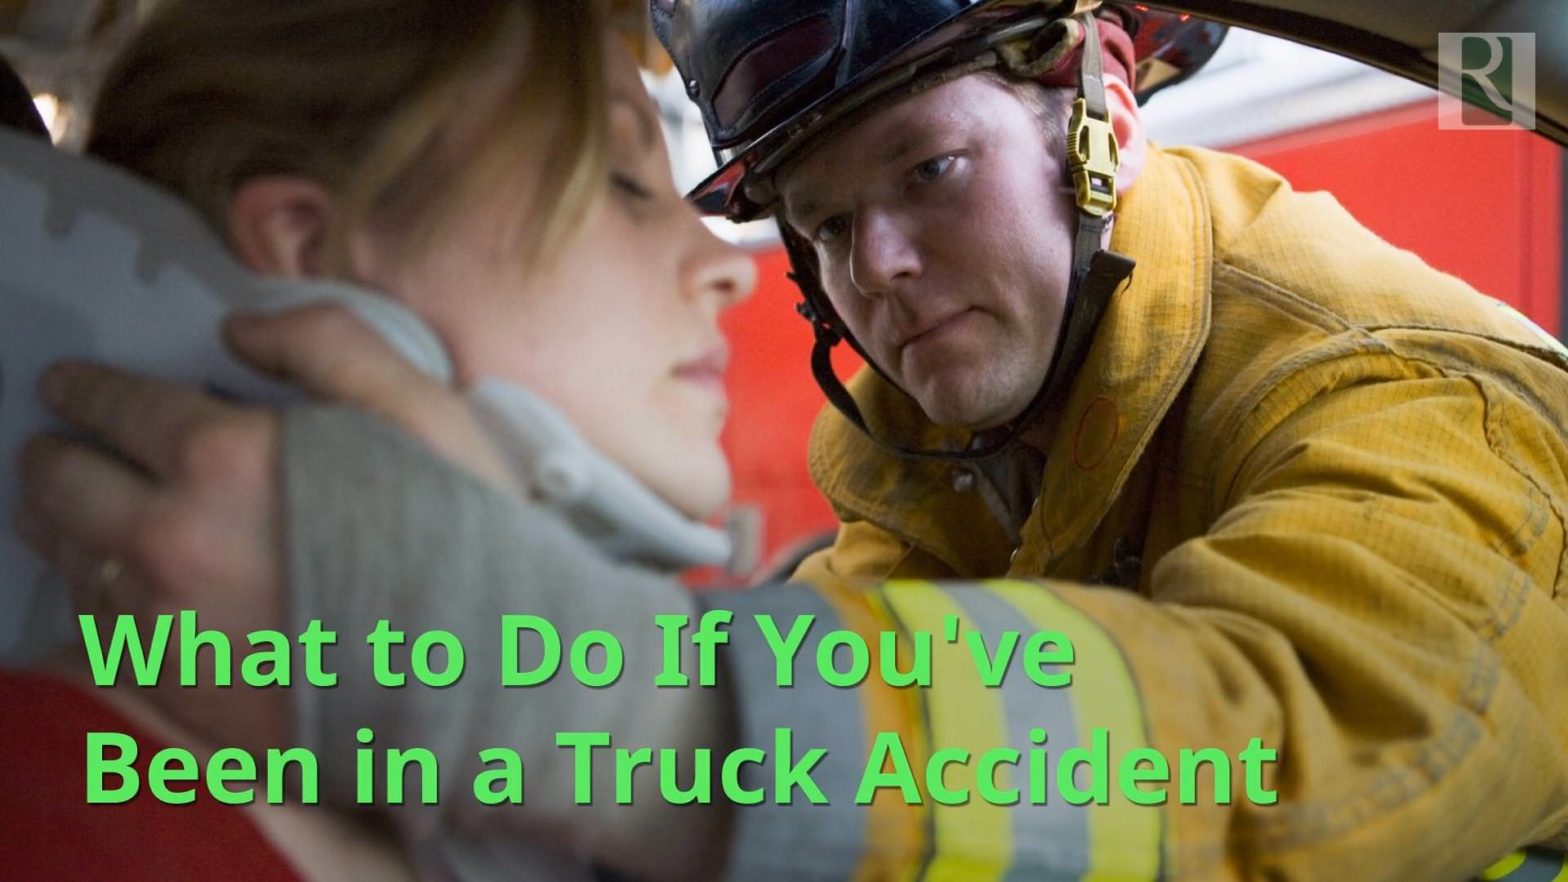 rafi what to do if you've been in a truck accident